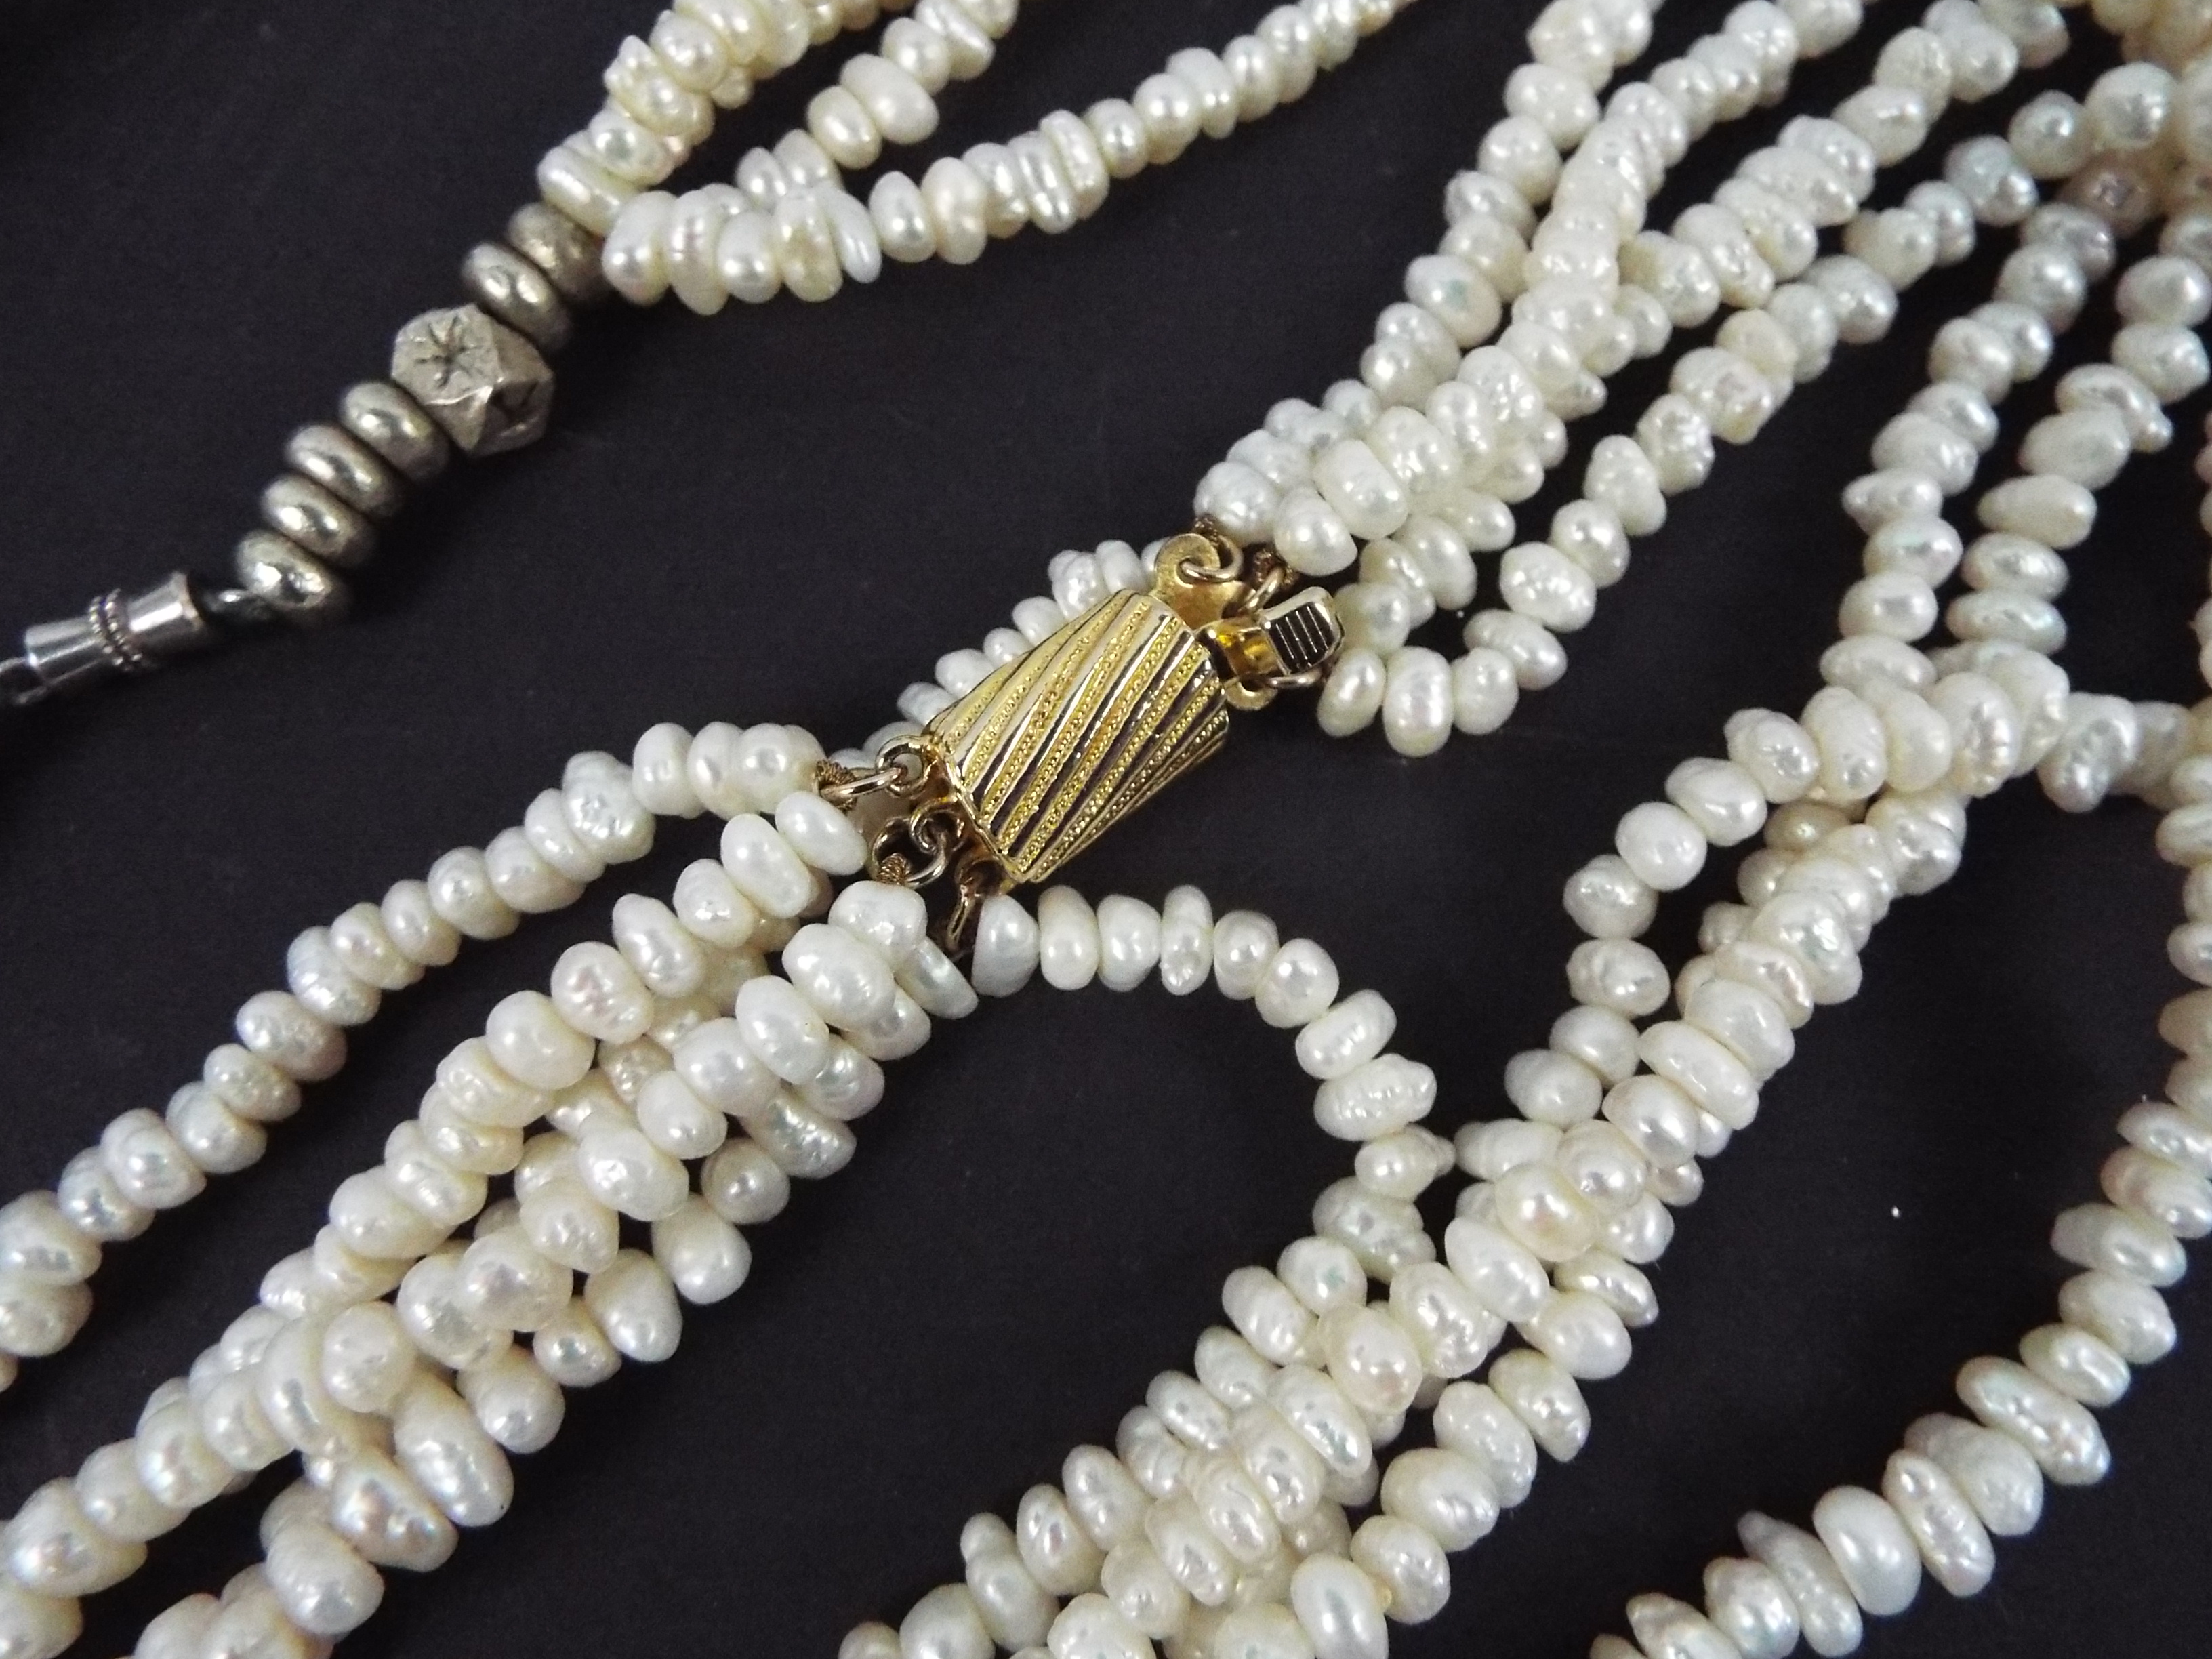 Two multi-strand necklaces, one with gilt metal clasp, longest 47 cm. - Image 3 of 5